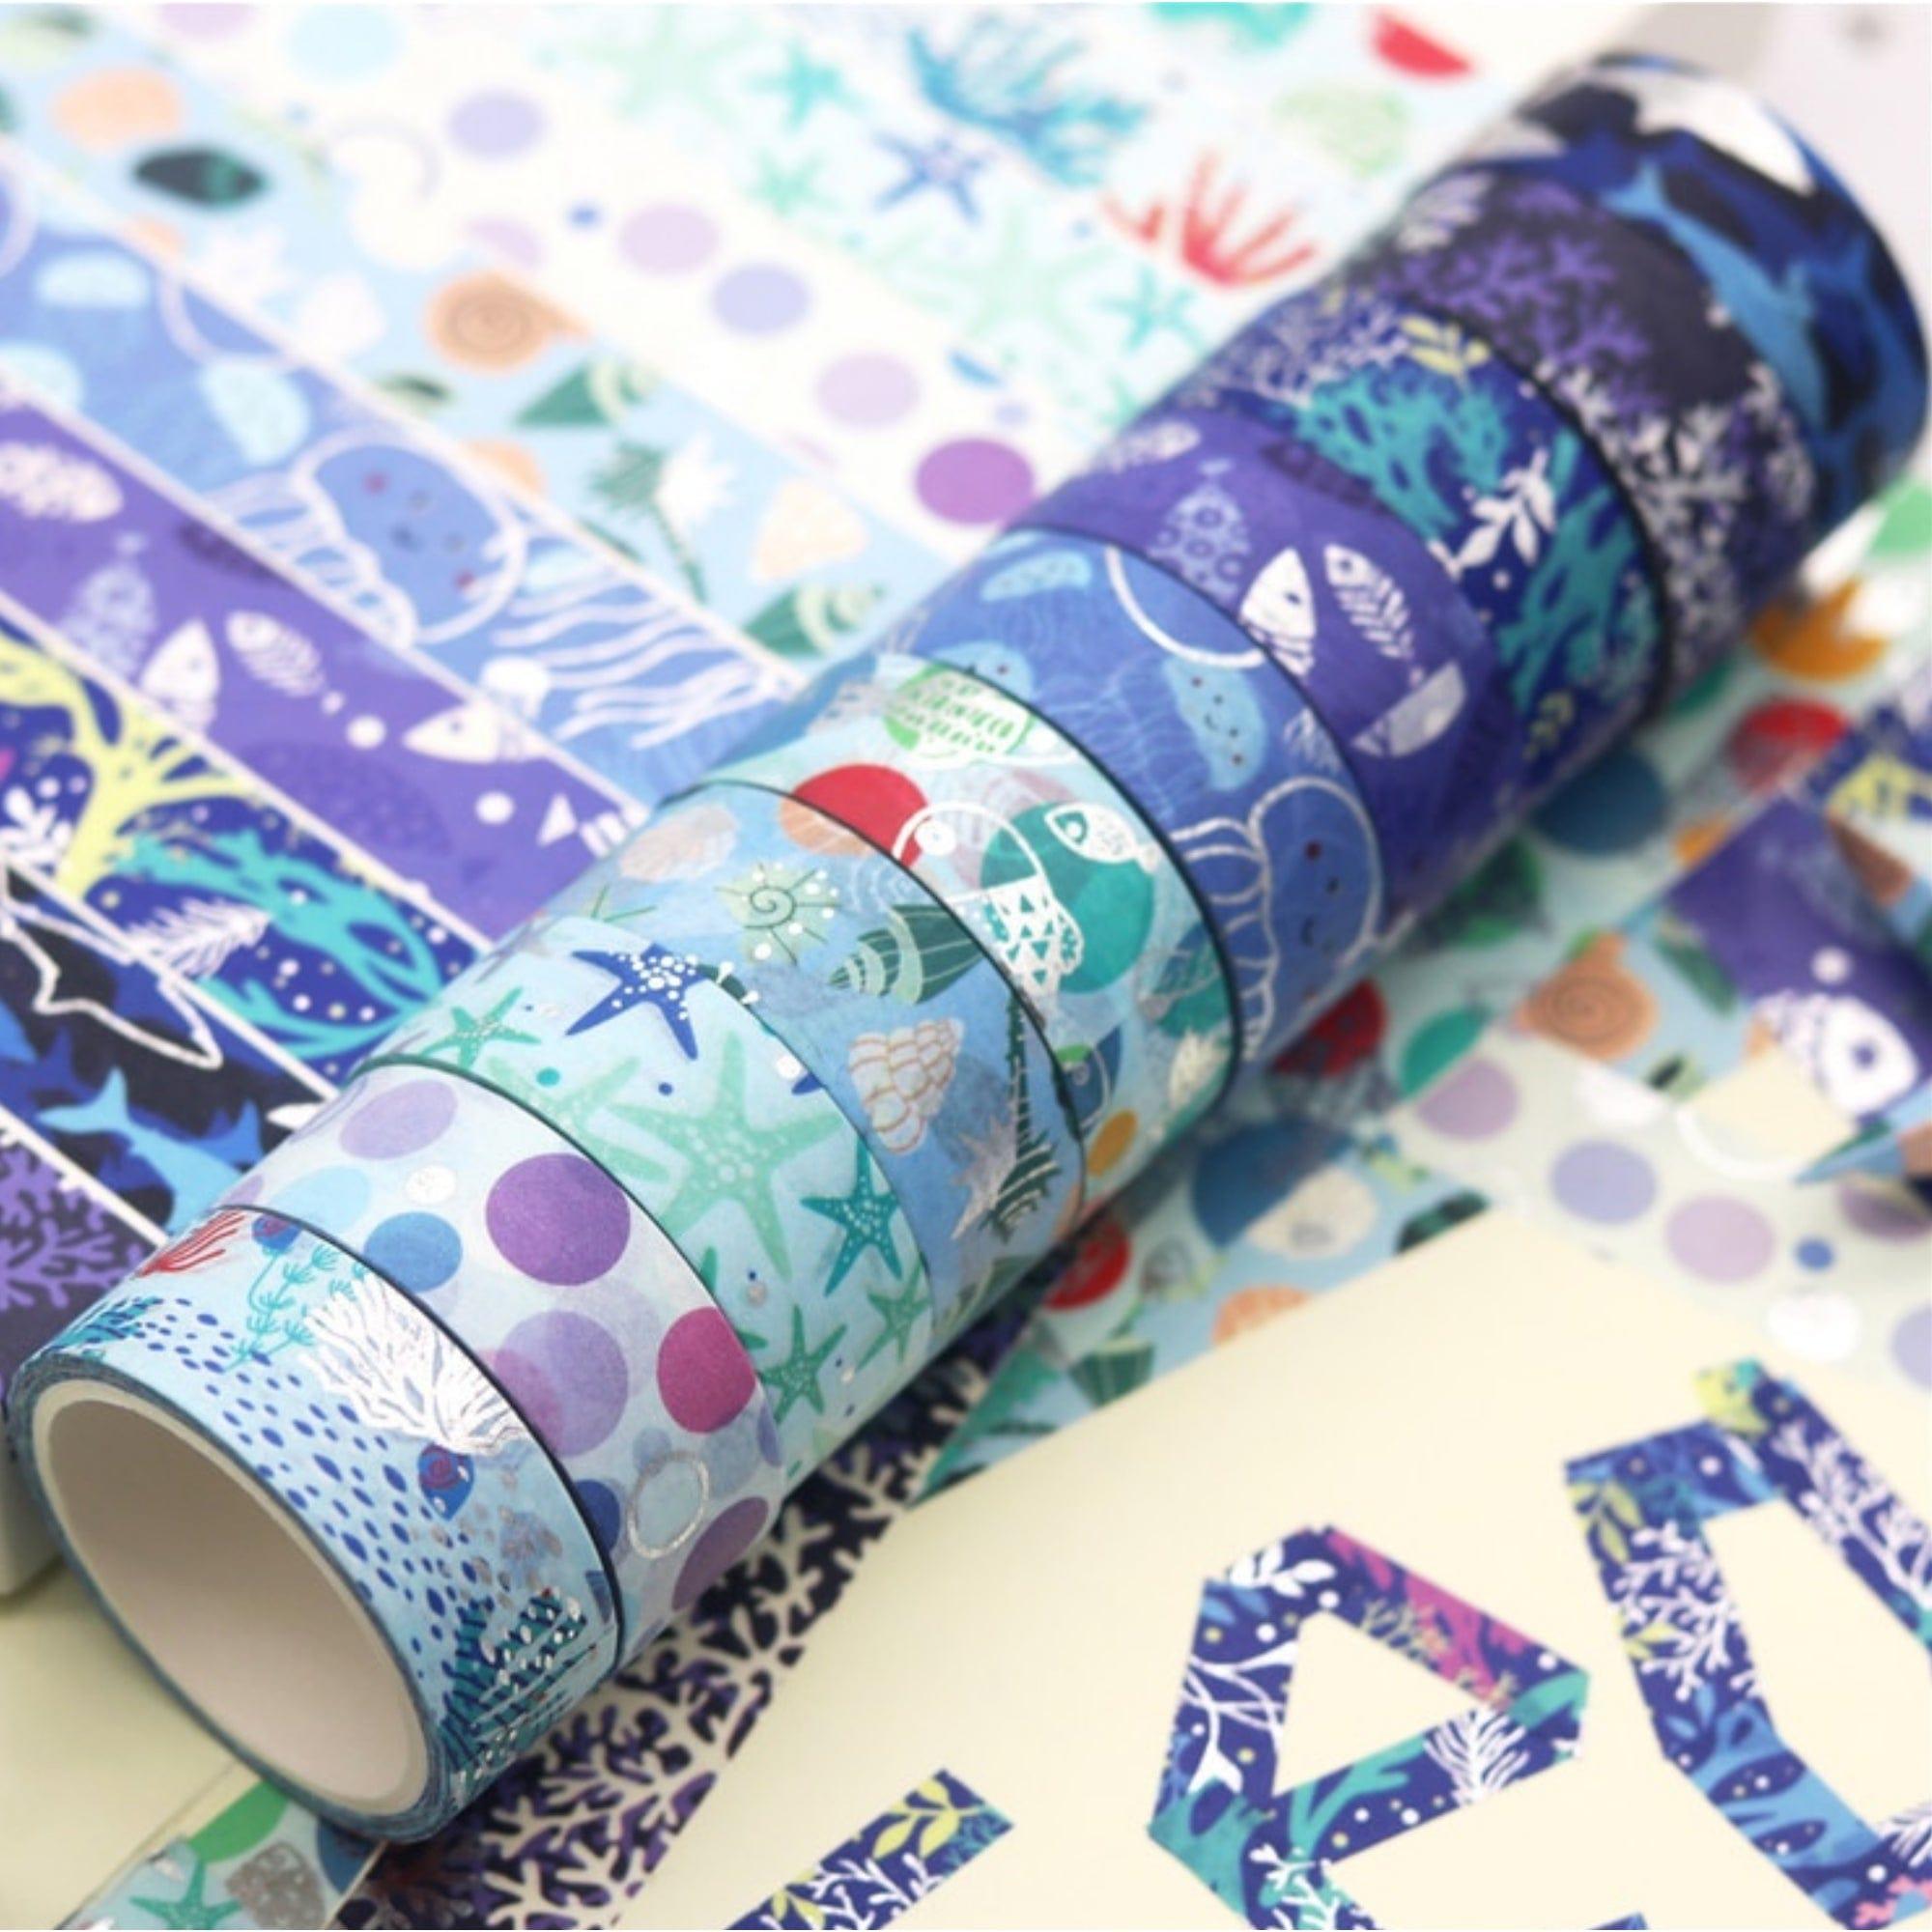 TW Collection Under The Sea Silver Foiled Washi Tape by SSC Designs - 10 Rolls (15mm x 8 Feet each)